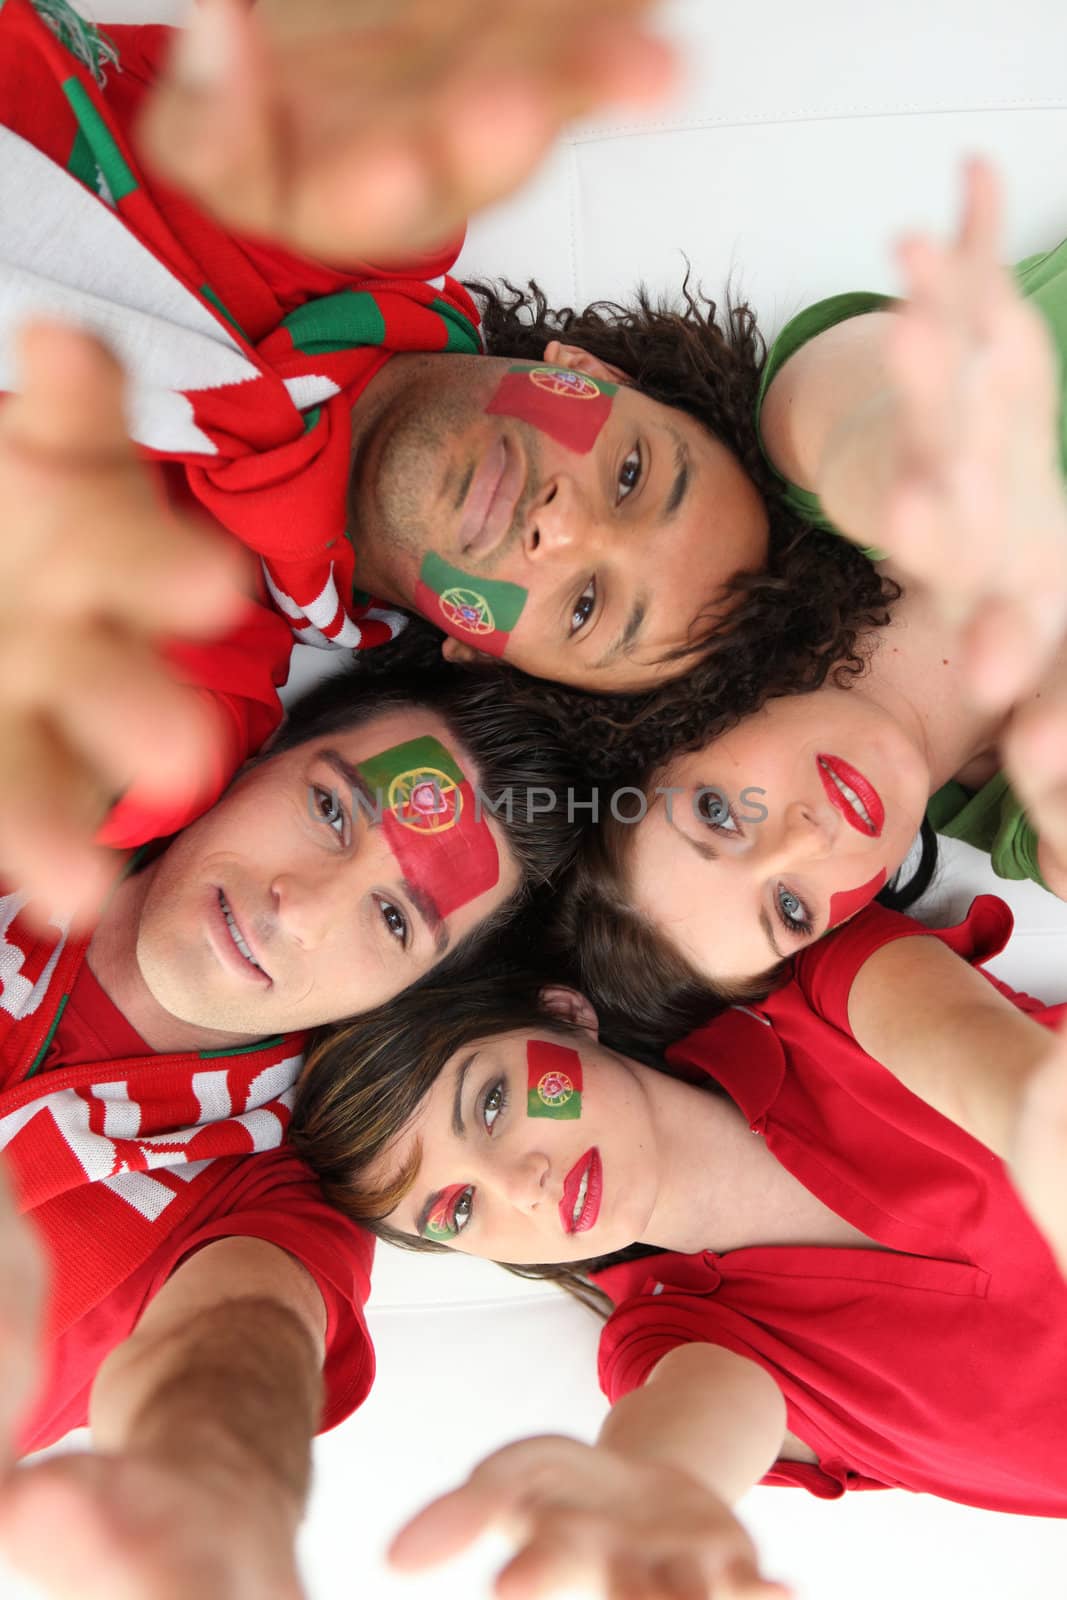 Portuguese football supporters